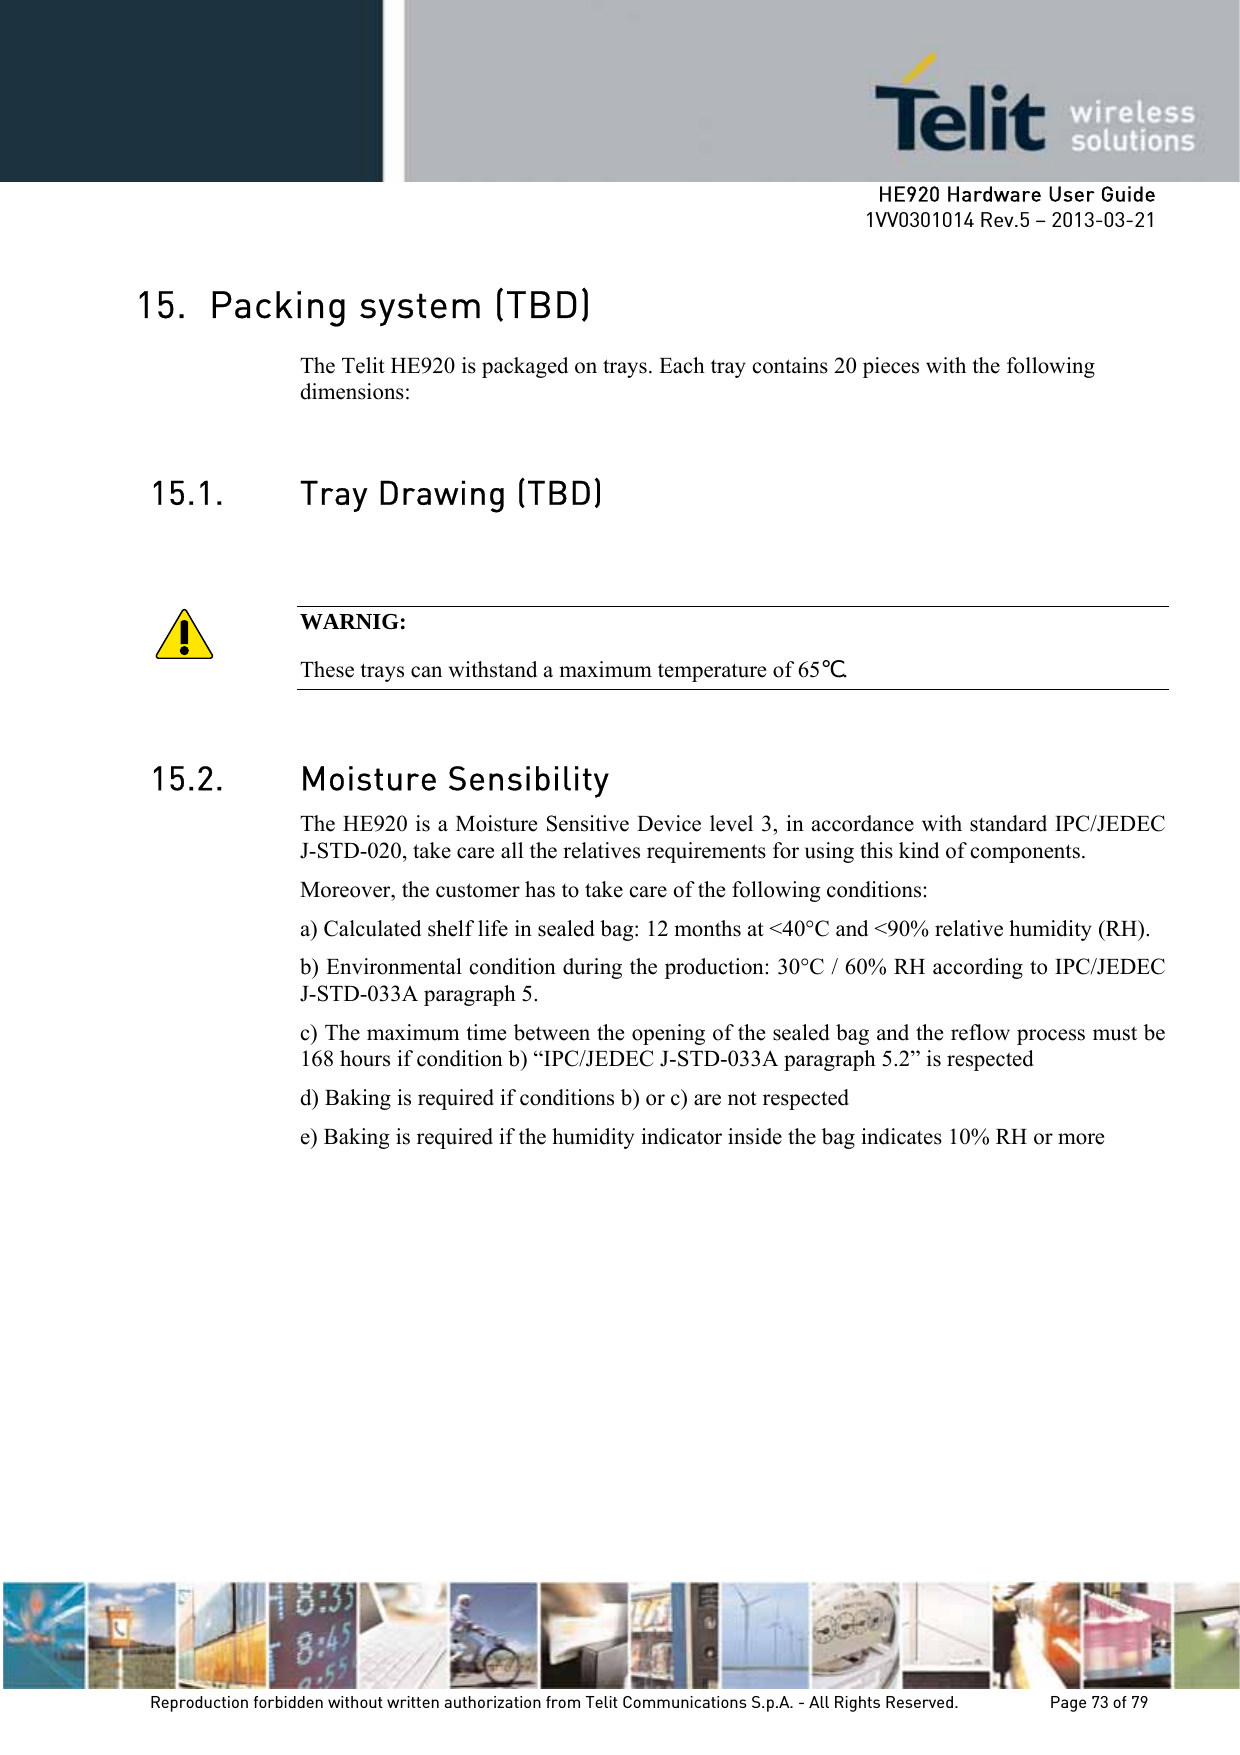     HE920 Hardware User Guide 1VV0301014 Rev.5 – 2013-03-21 Reproduction forbidden without written authorization from Telit Communications S.p.A. - All Rights Reserved.    Page 73 of 79  15. Packing system (TBD) The Telit HE920 is packaged on trays. Each tray contains 20 pieces with the following dimensions:  15.1. Tray Drawing (TBD)   WARNIG: These trays can withstand a maximum temperature of 65℃.   15.2. Moisture Sensibility The HE920 is a Moisture Sensitive Device level 3, in accordance with standard IPC/JEDEC J-STD-020, take care all the relatives requirements for using this kind of components. Moreover, the customer has to take care of the following conditions: a) Calculated shelf life in sealed bag: 12 months at &lt;40°C and &lt;90% relative humidity (RH). b) Environmental condition during the production: 30°C / 60% RH according to IPC/JEDEC J-STD-033A paragraph 5.  c) The maximum time between the opening of the sealed bag and the reflow process must be 168 hours if condition b) “IPC/JEDEC J-STD-033A paragraph 5.2” is respected  d) Baking is required if conditions b) or c) are not respected  e) Baking is required if the humidity indicator inside the bag indicates 10% RH or more  